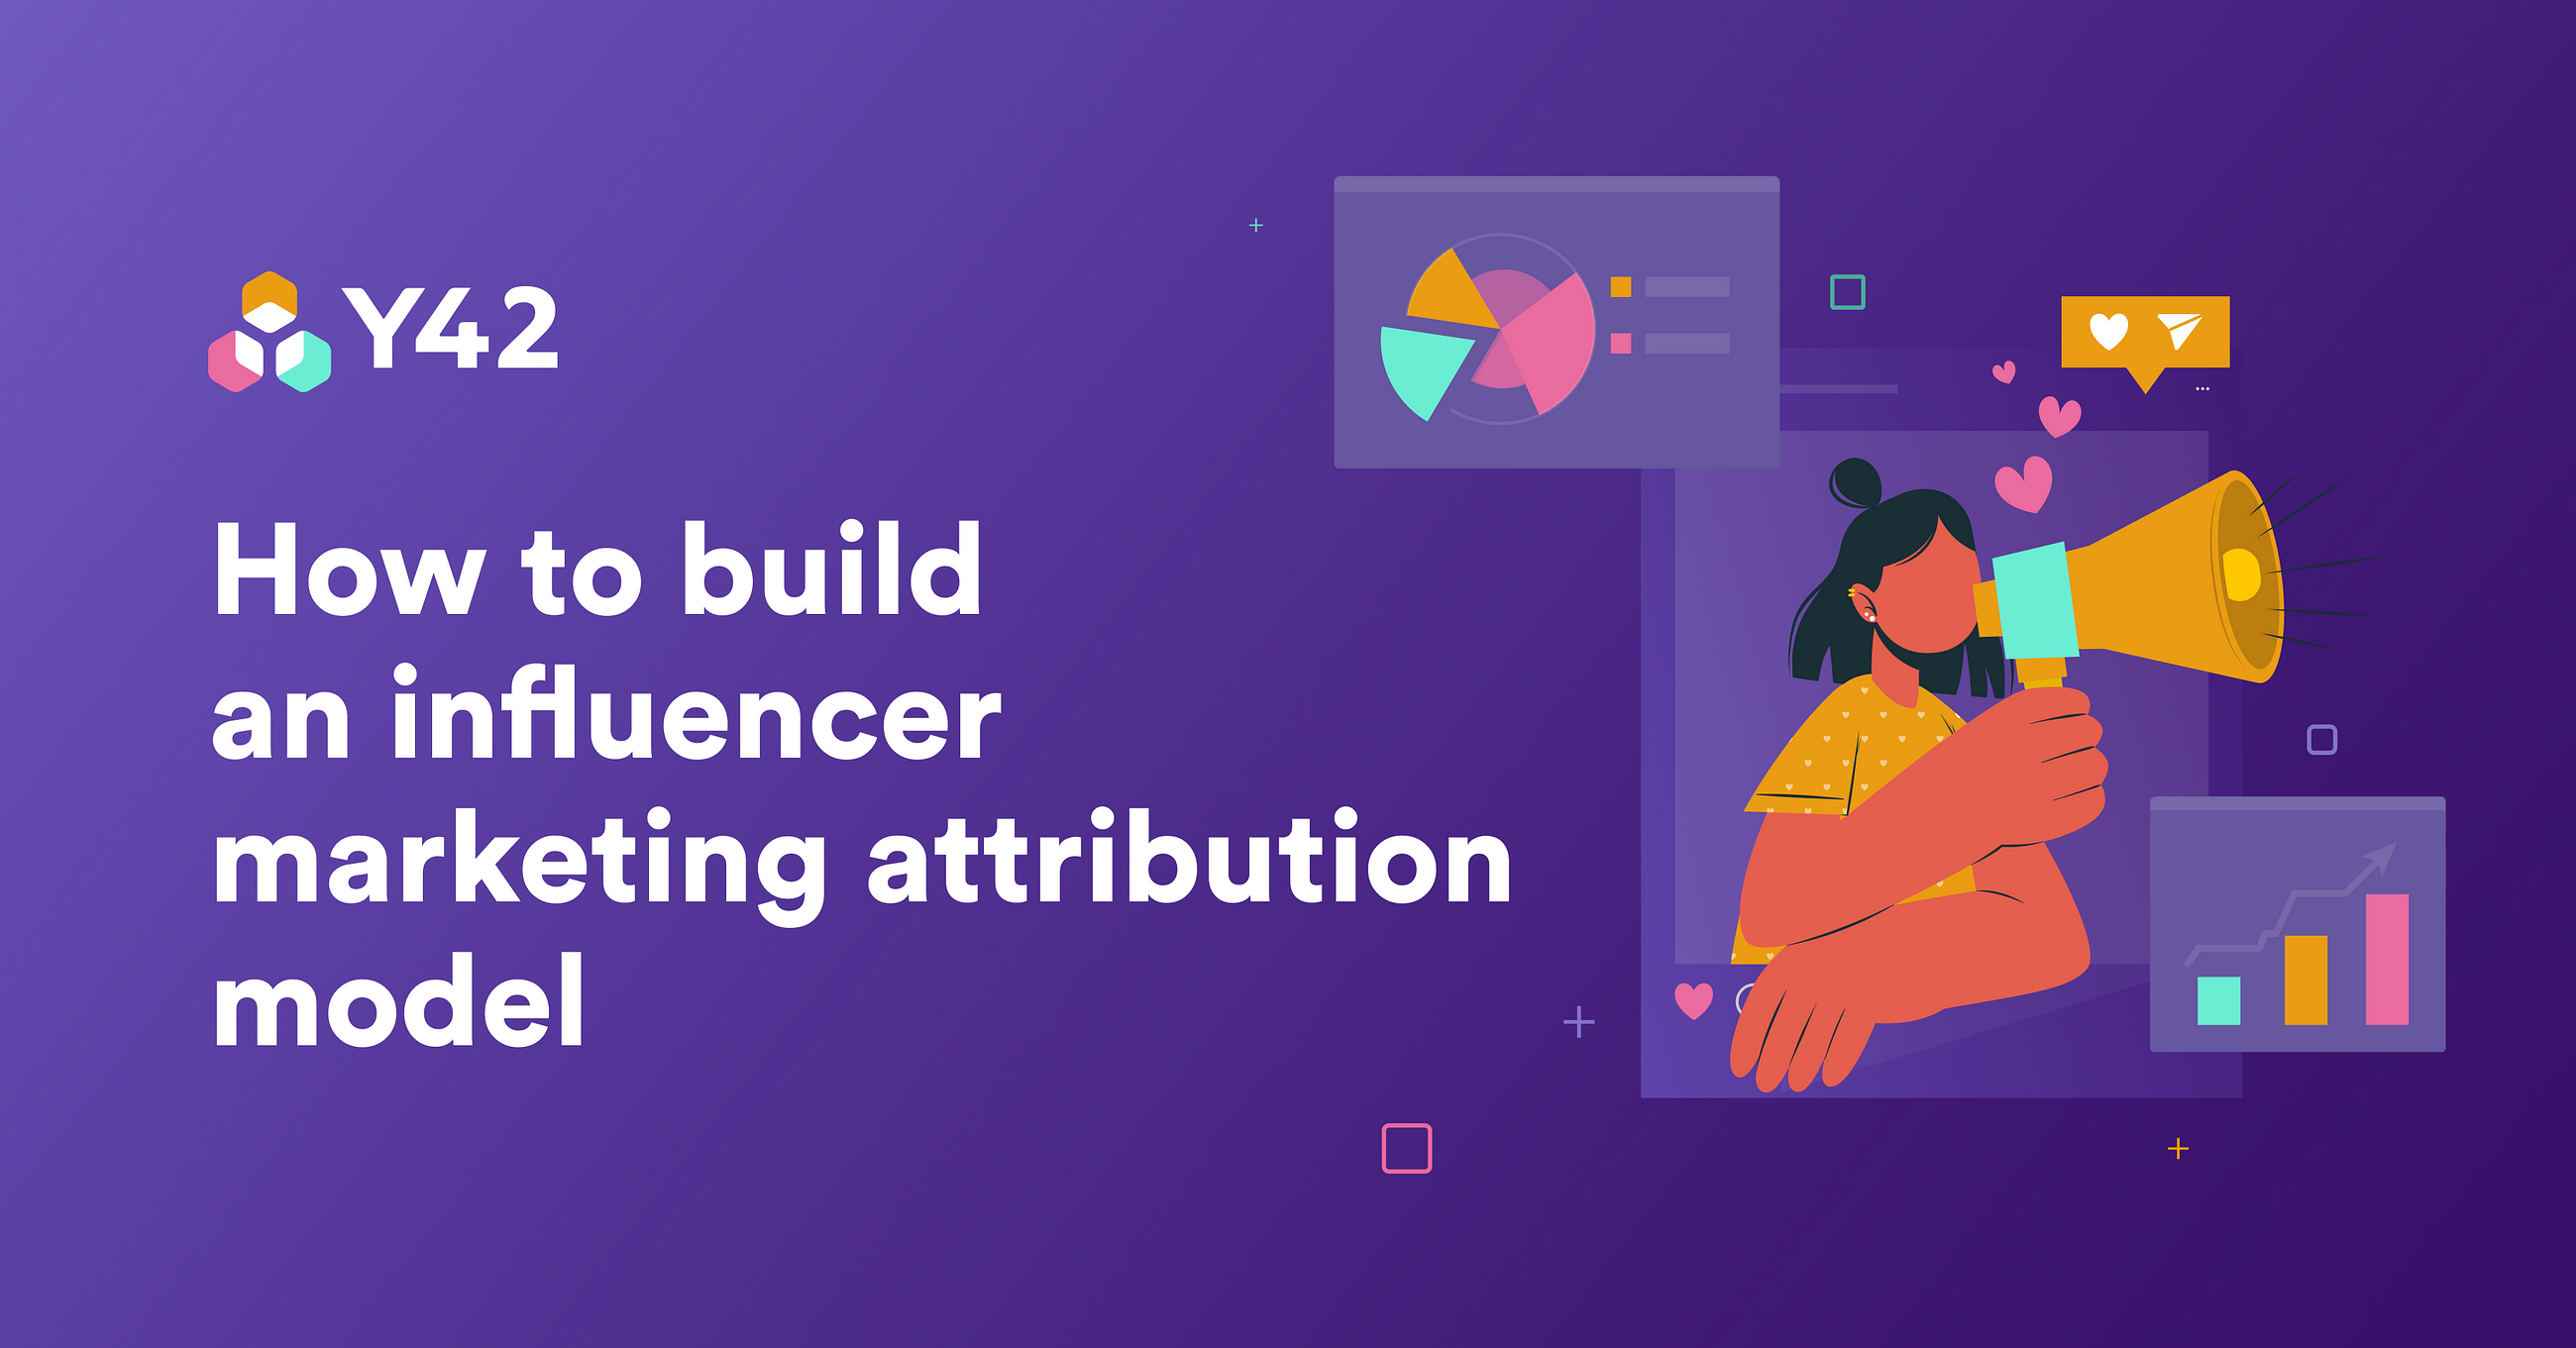 How to build an influencer marketing attribution model